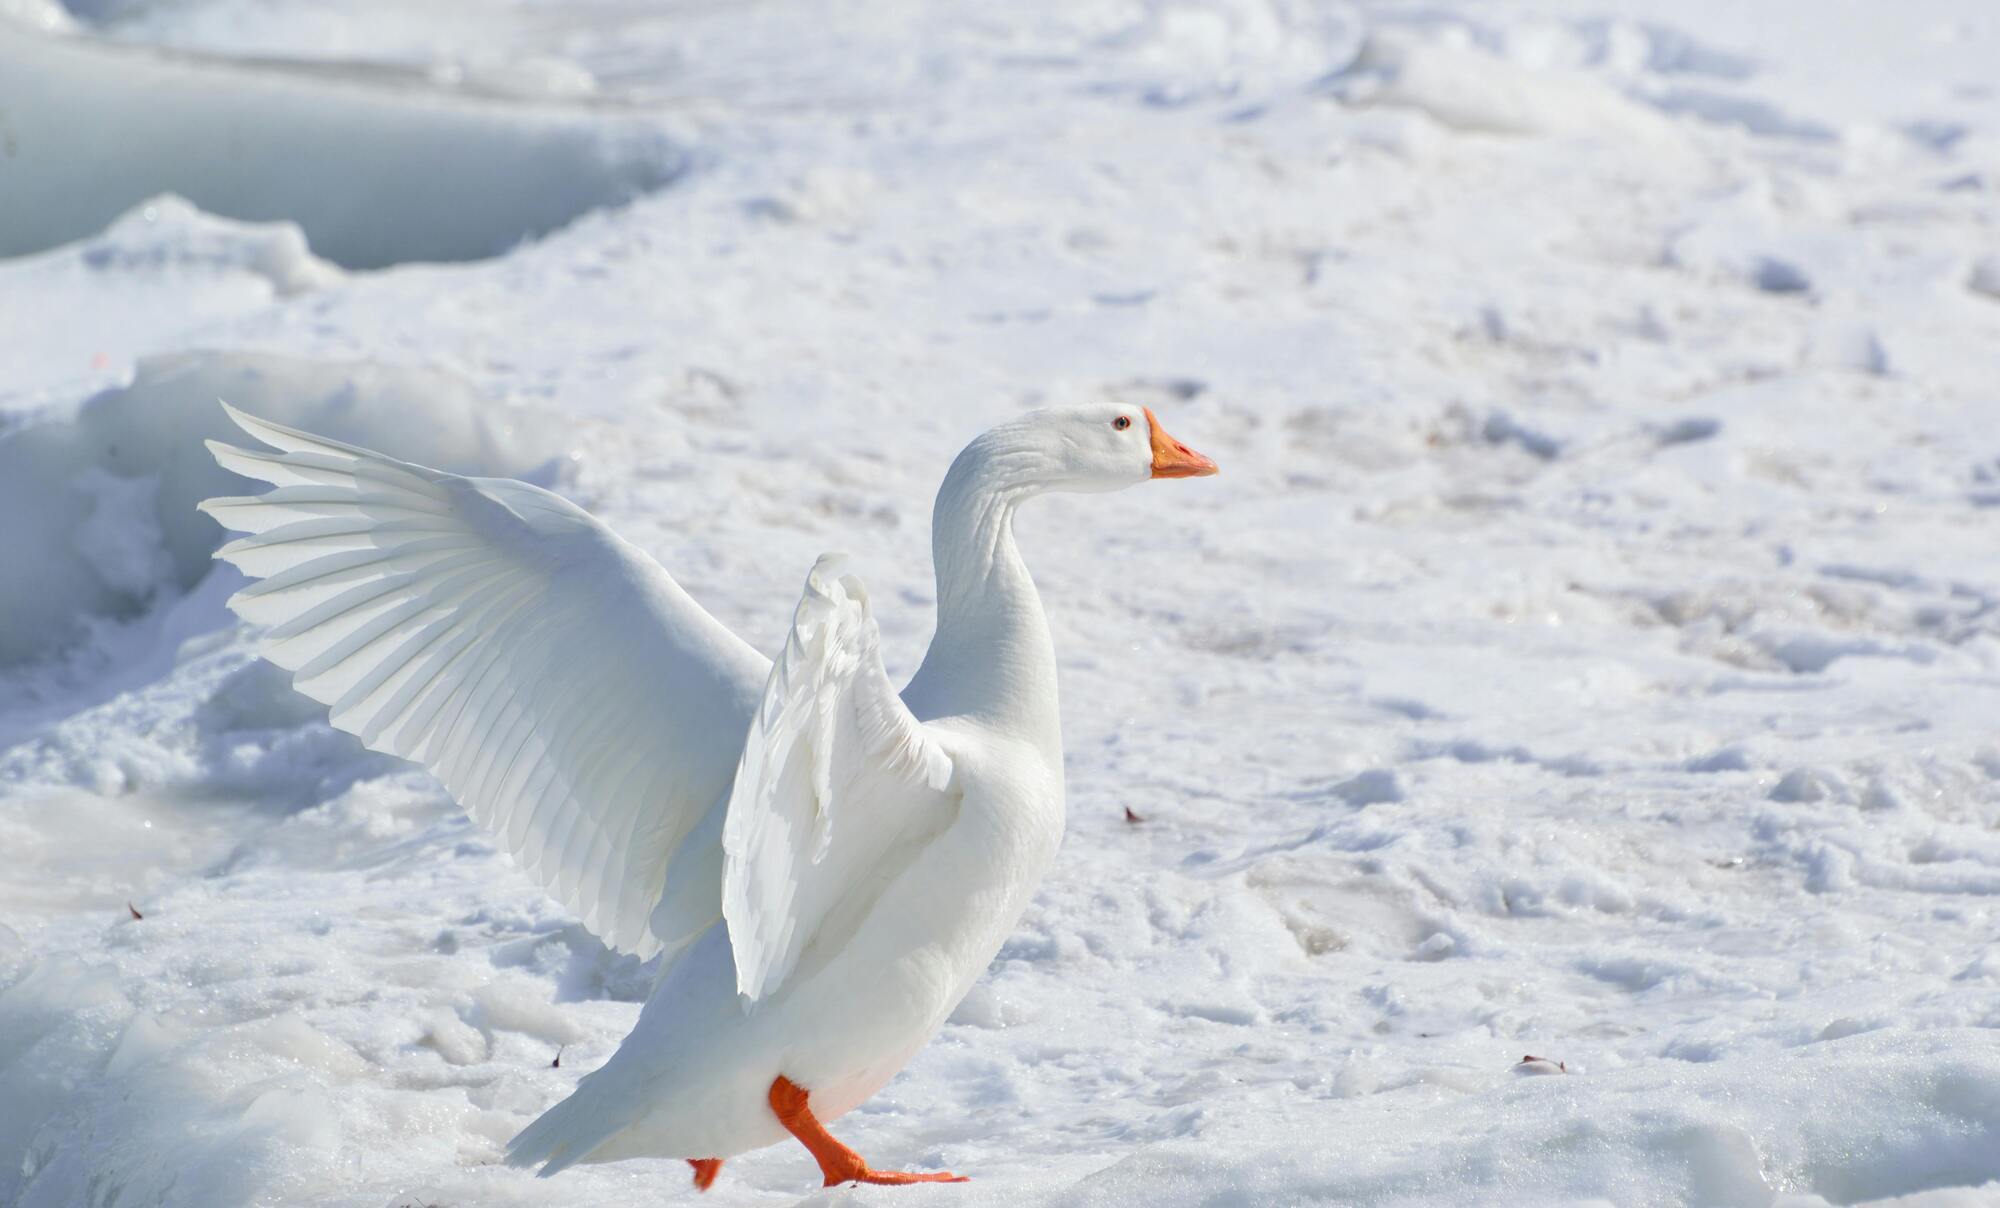 The snow goose is the spirit animal of Cancer